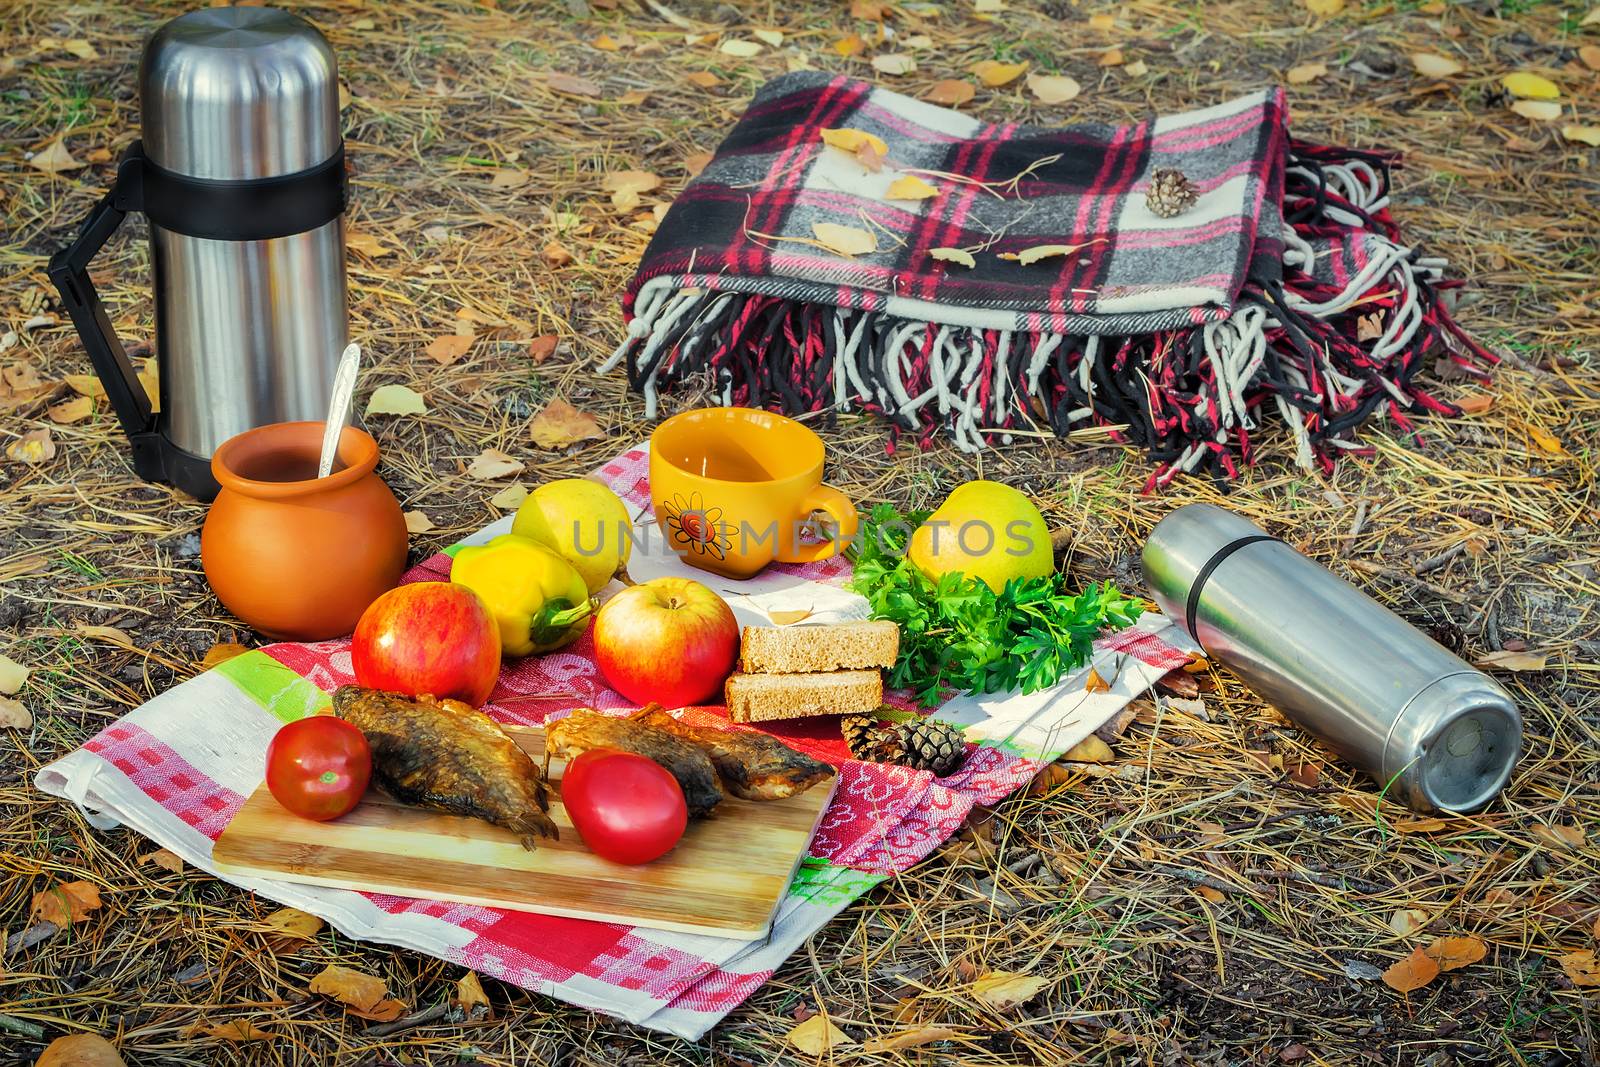 Products and a picnic blanket in the woods by georgina198